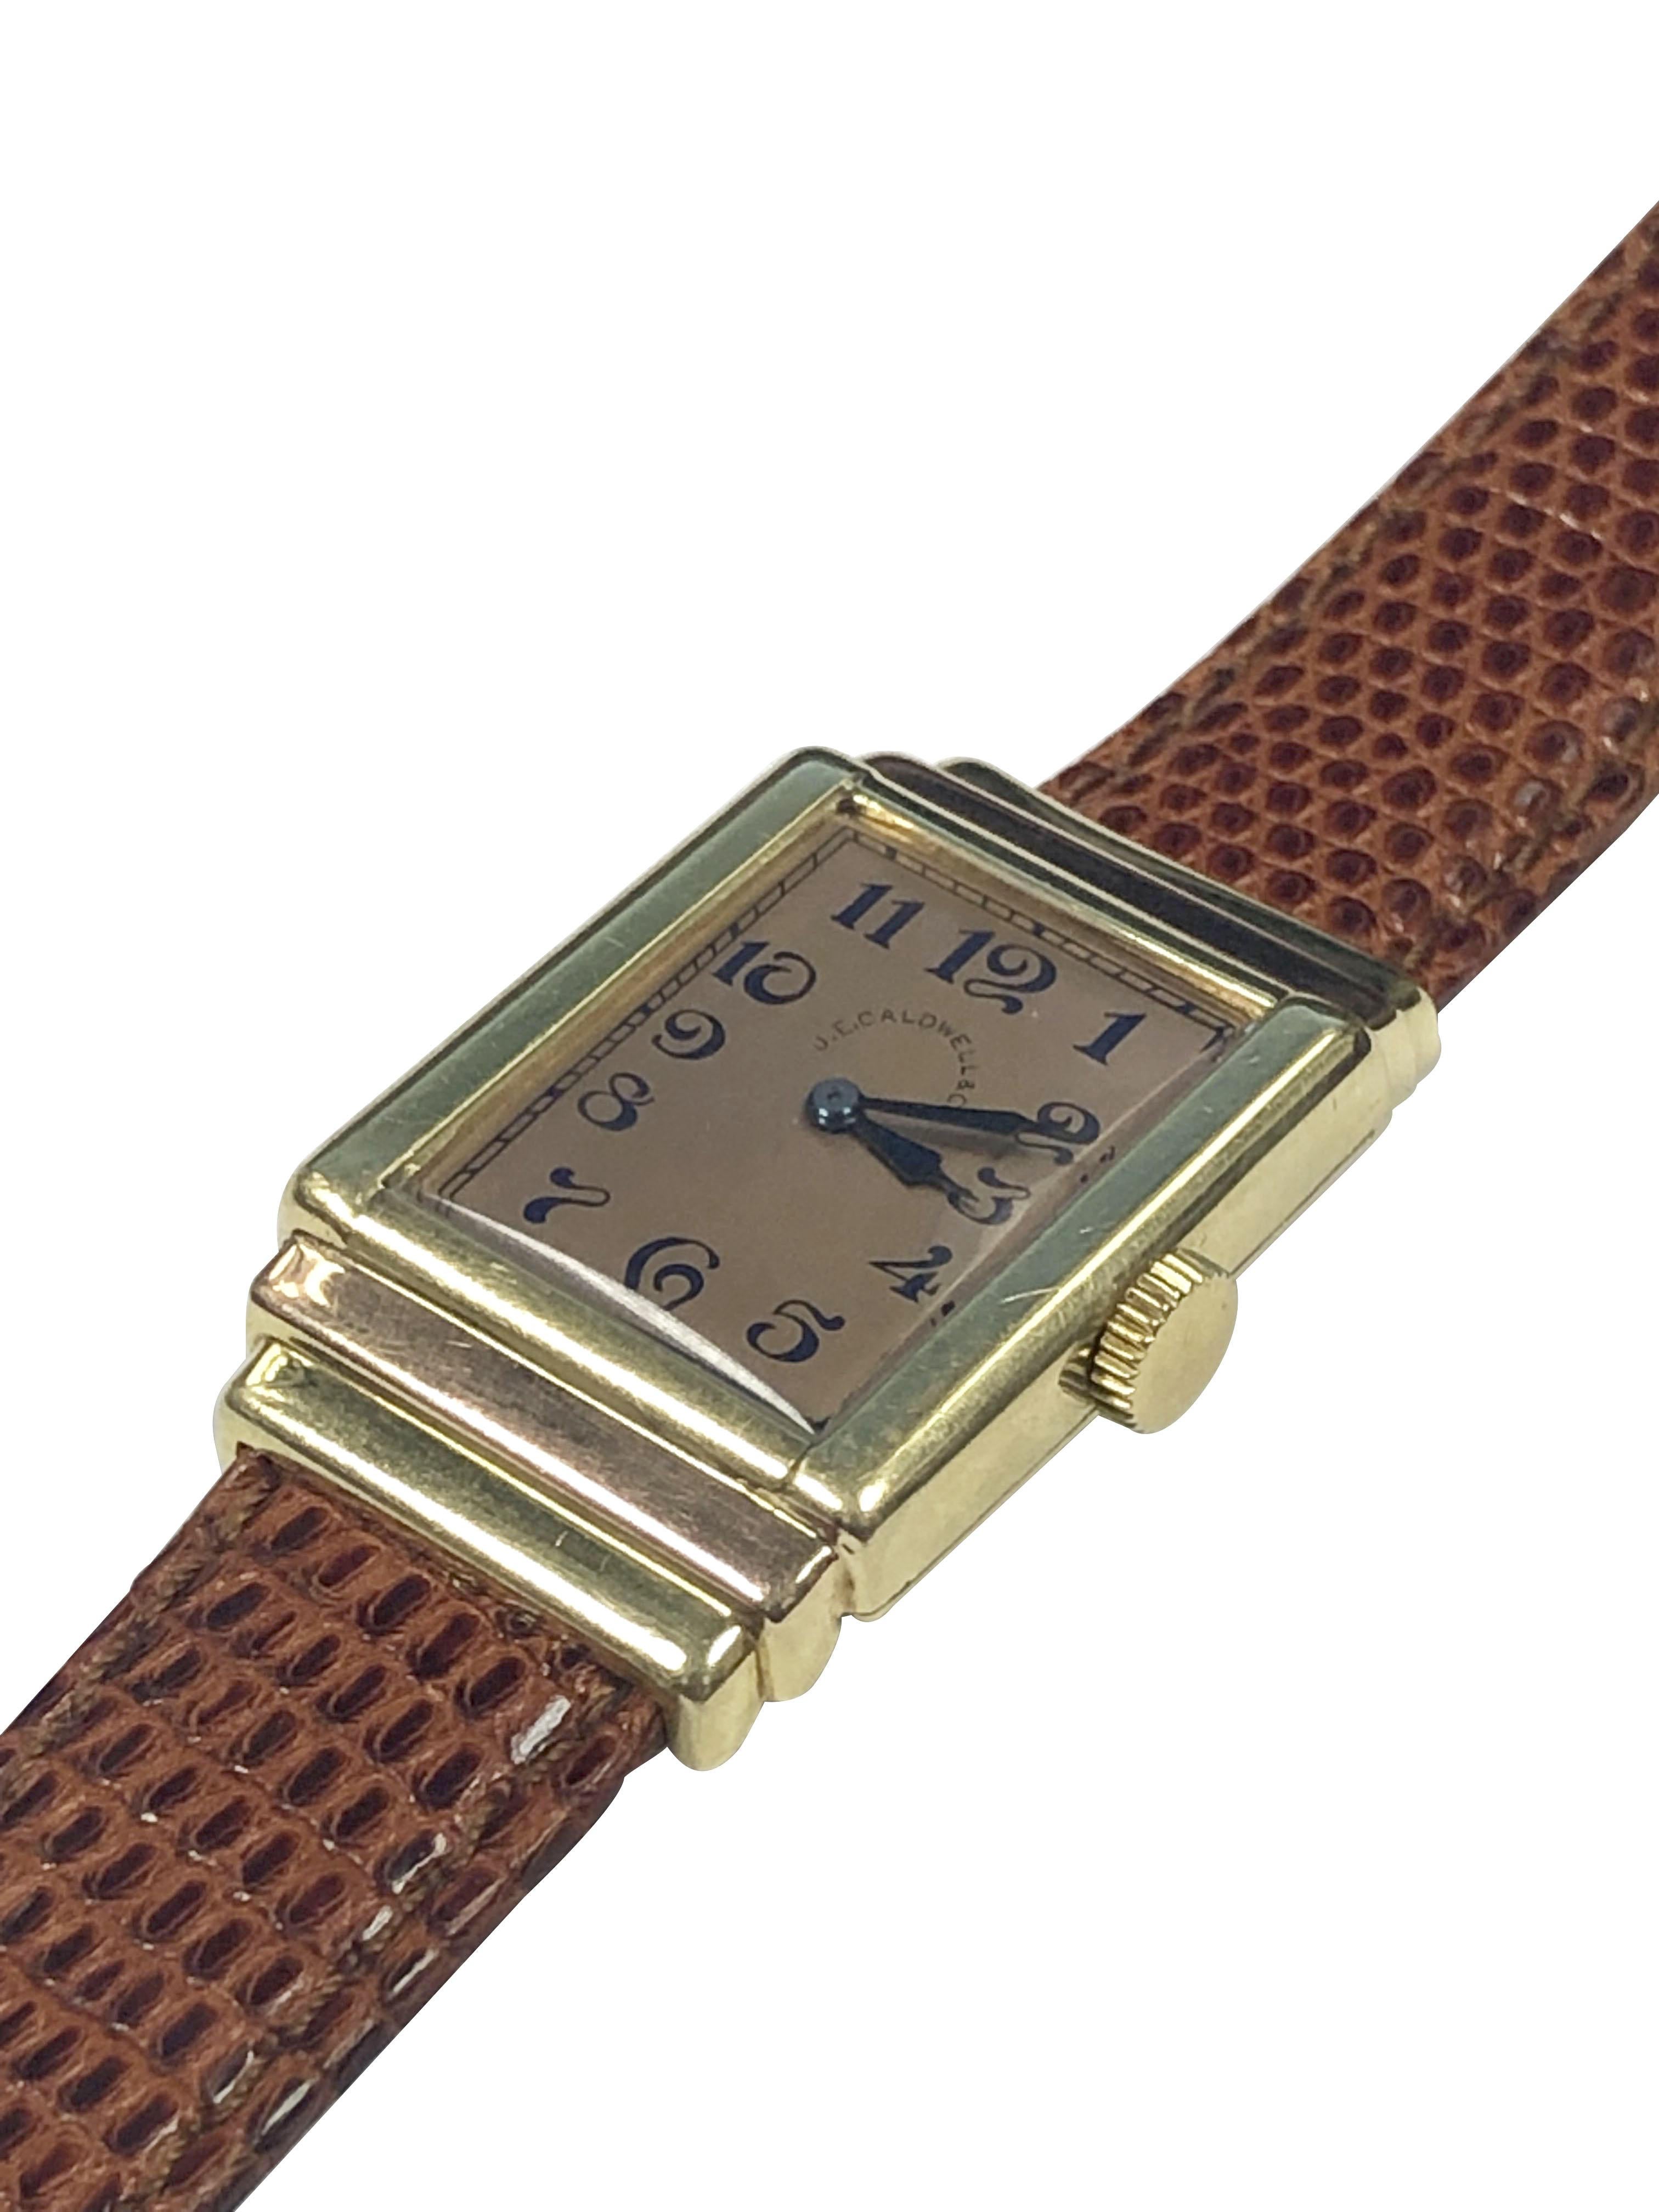 Circa 1930s I.W.C. International Watch Company, wrist watch retailed by J.E. Caldwell. 39 X 25 M.M. 2 Piece 18k Green and Rose Gold stepped case by Cress Arrow case makers. 17 Jewel Mechanical, Manual wind movement, original Rose Satin dial with